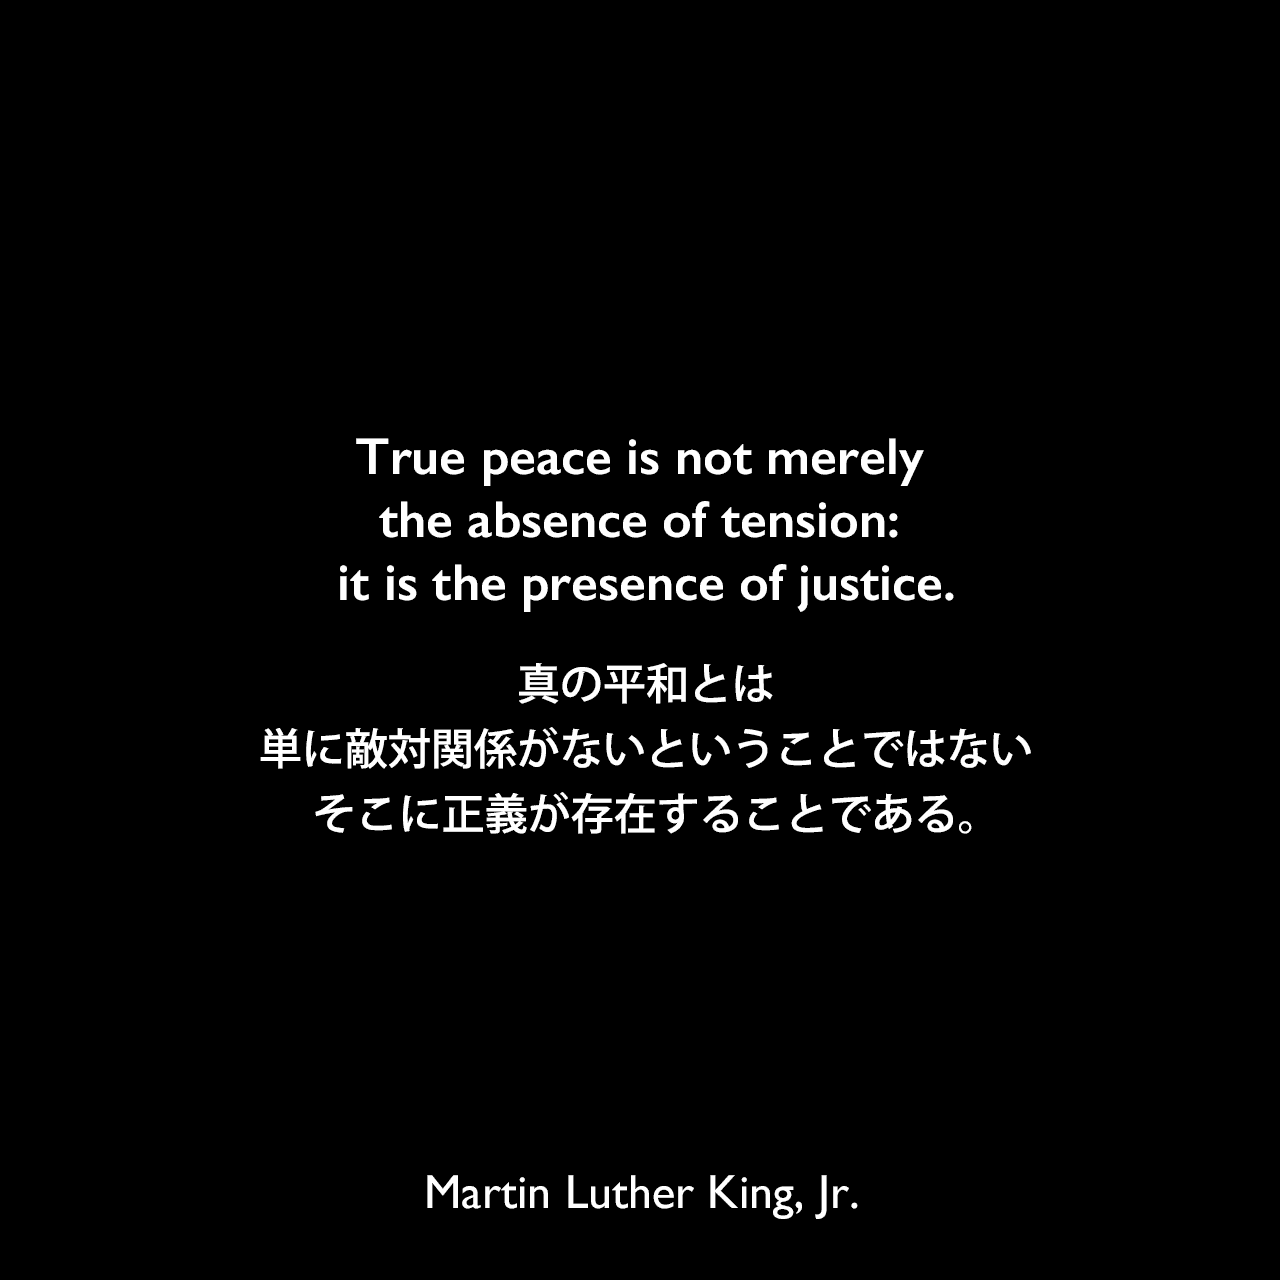 True peace is not merely the absence of tension: it is the presence of justice.真の平和とは、単に敵対関係がないということではない、そこに正義が存在することである。Martin Luther King, Jr.